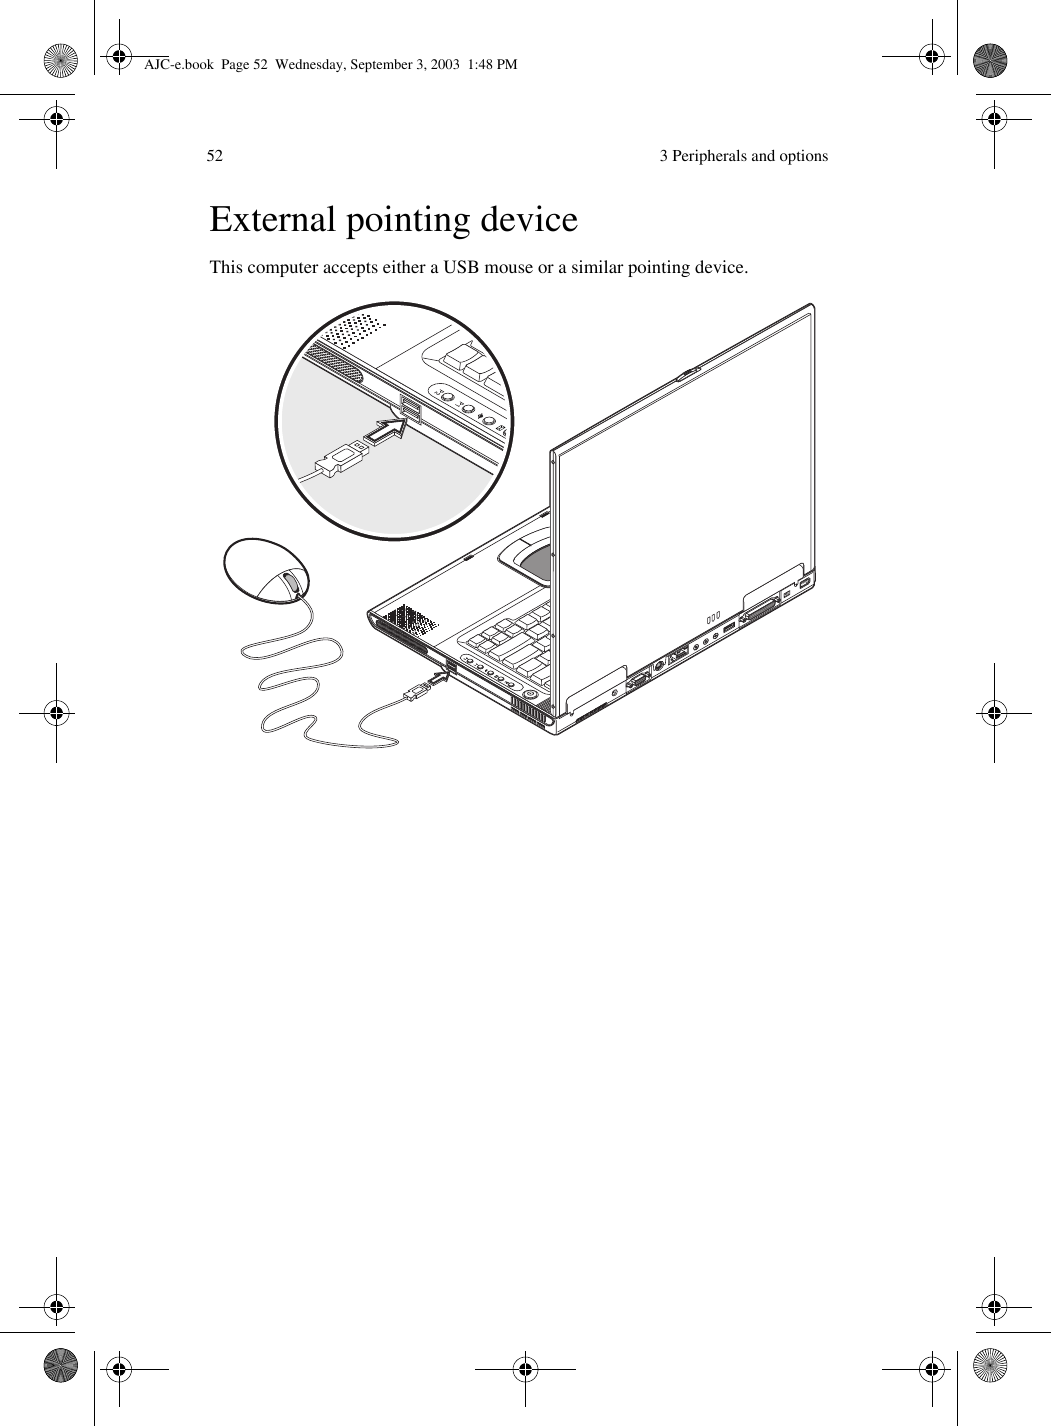  3 Peripherals and options52External pointing deviceThis computer accepts either a USB mouse or a similar pointing device.  AJC-e.book  Page 52  Wednesday, September 3, 2003  1:48 PM